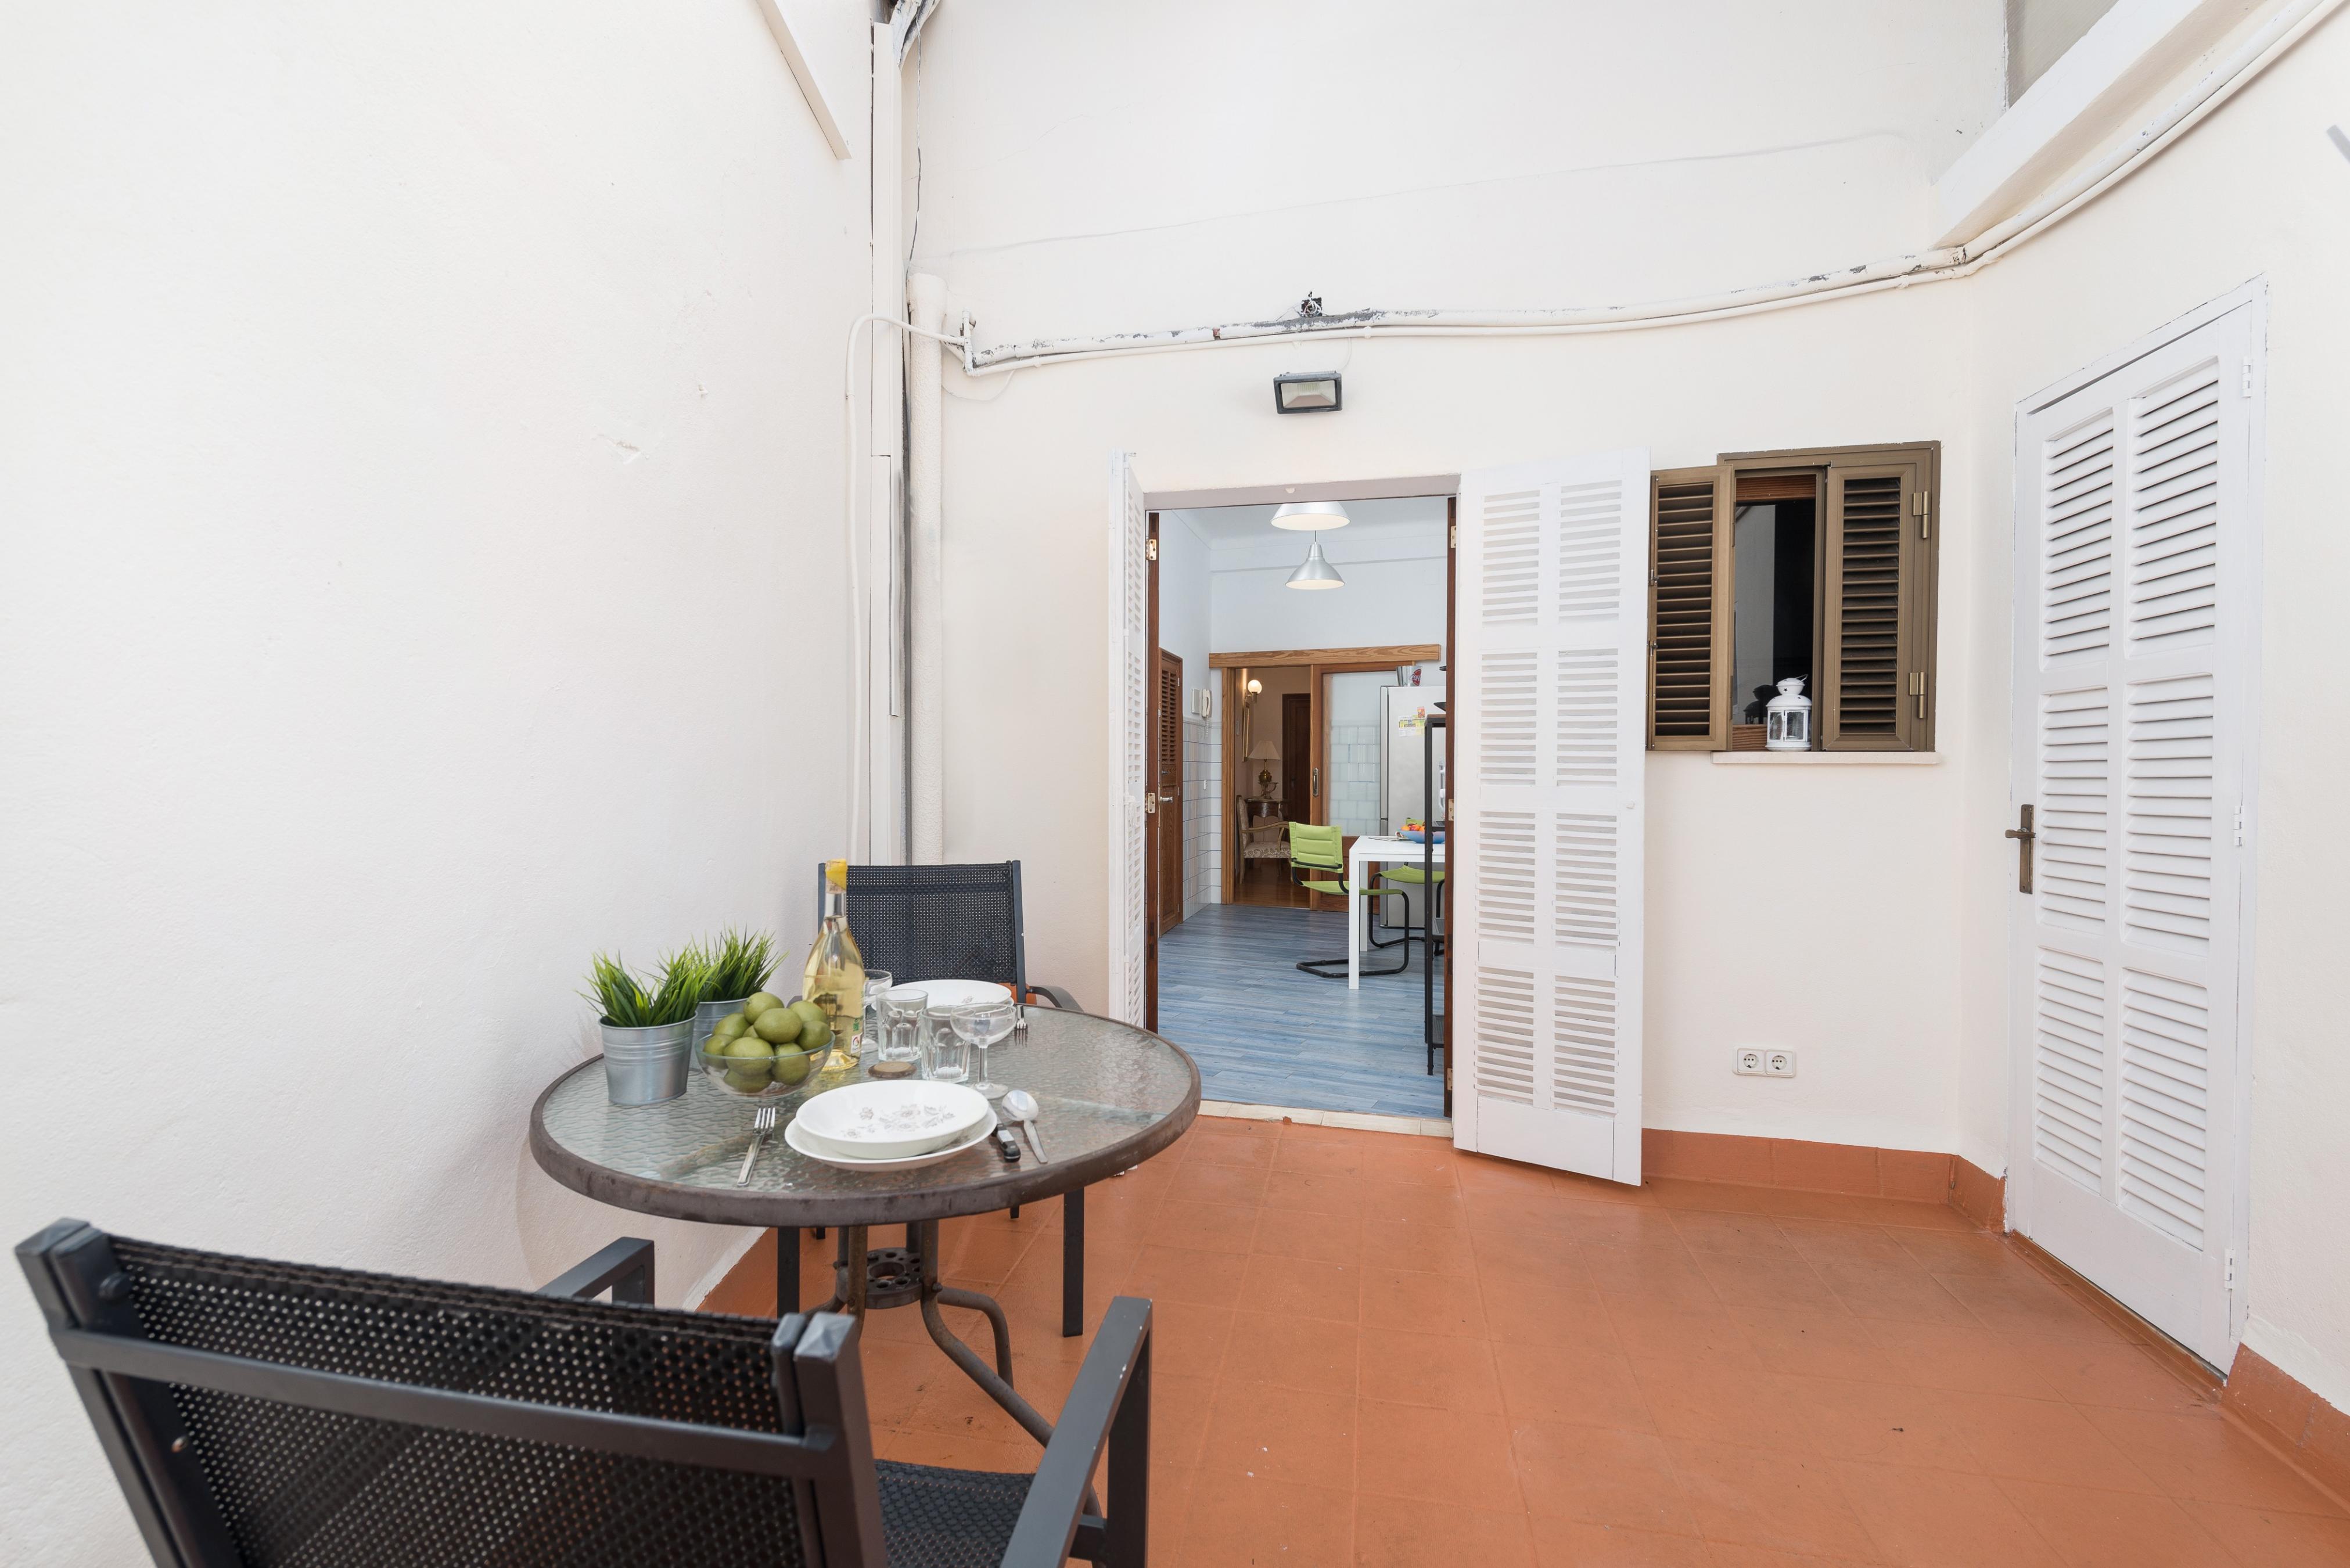 Property Image 2 - MARGARITAS - Fantastic townhouse in Santa Margalida, boasting a great terrace and only 9 km away from the 